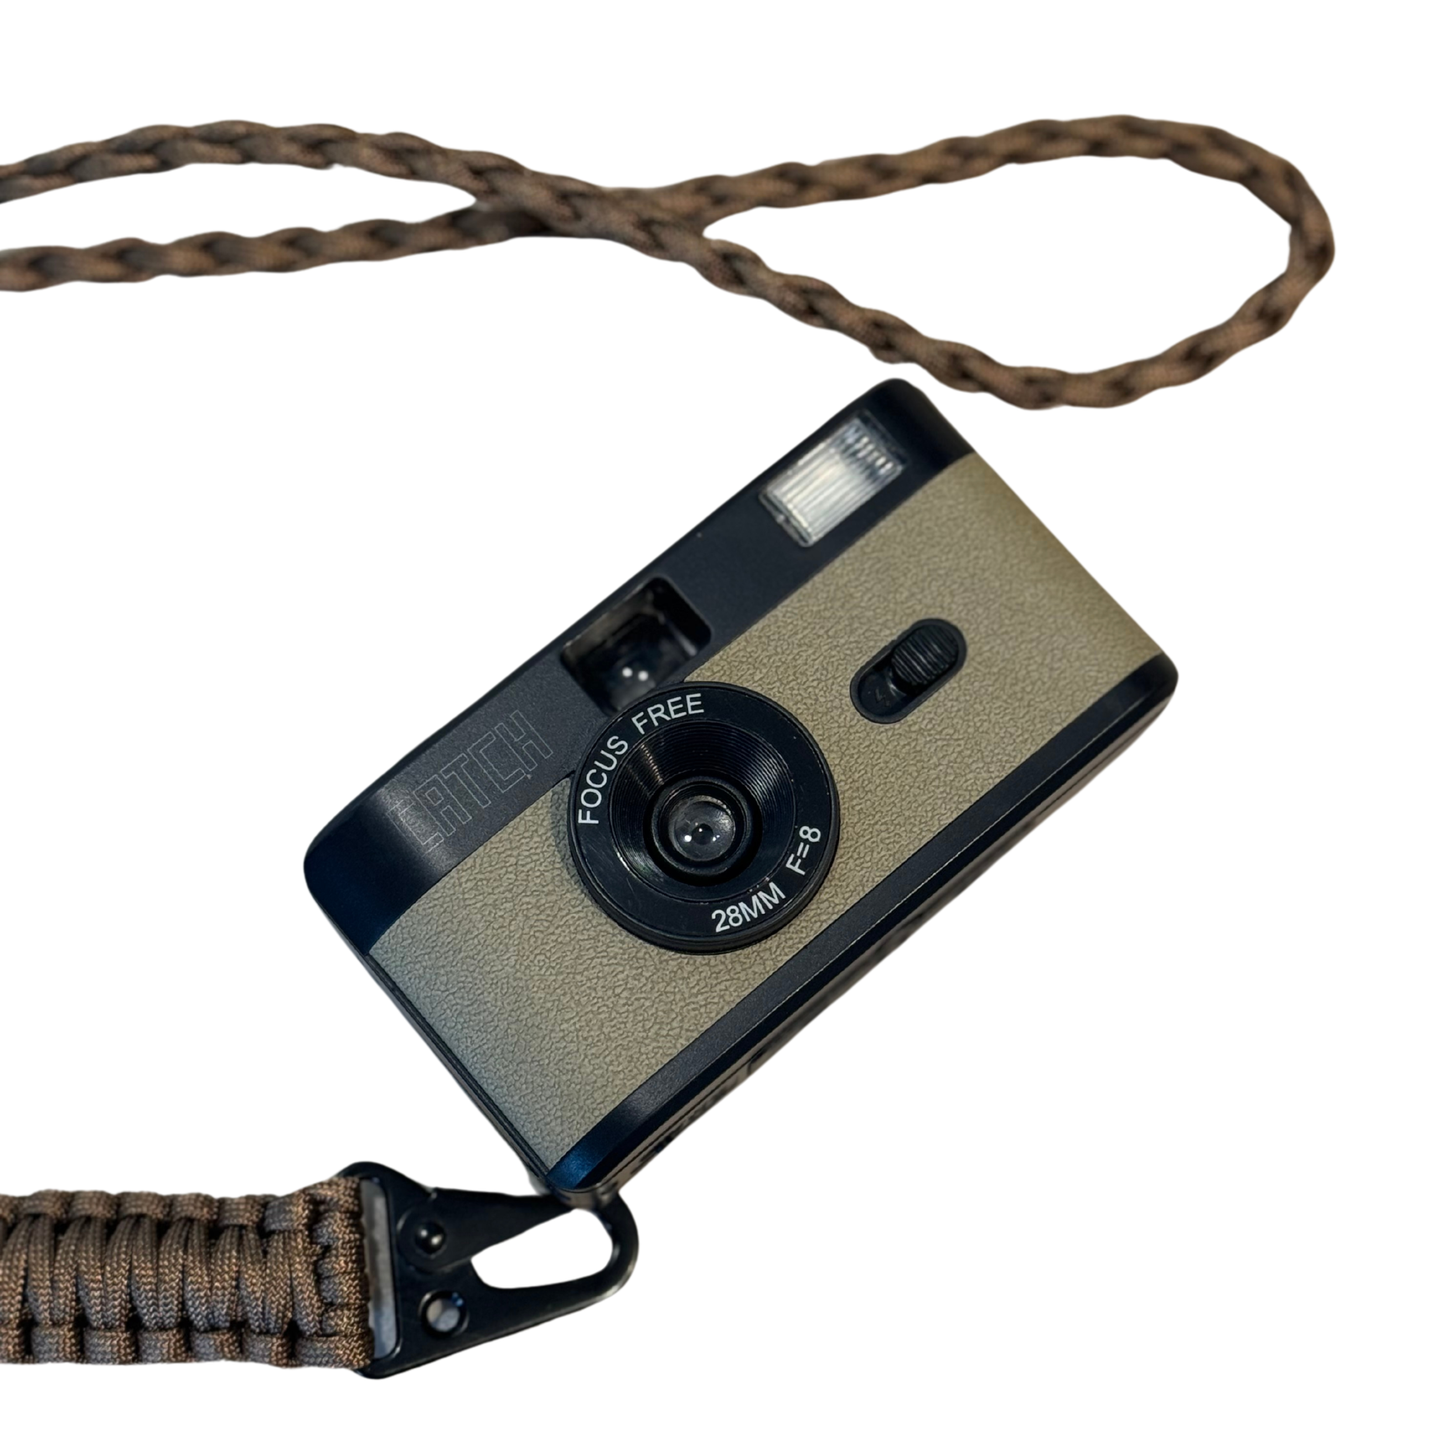 Save 40% with the CATCH Starter Bundle - CATCH Camera, 2 x 35mm films, corduroy bag and lanyard